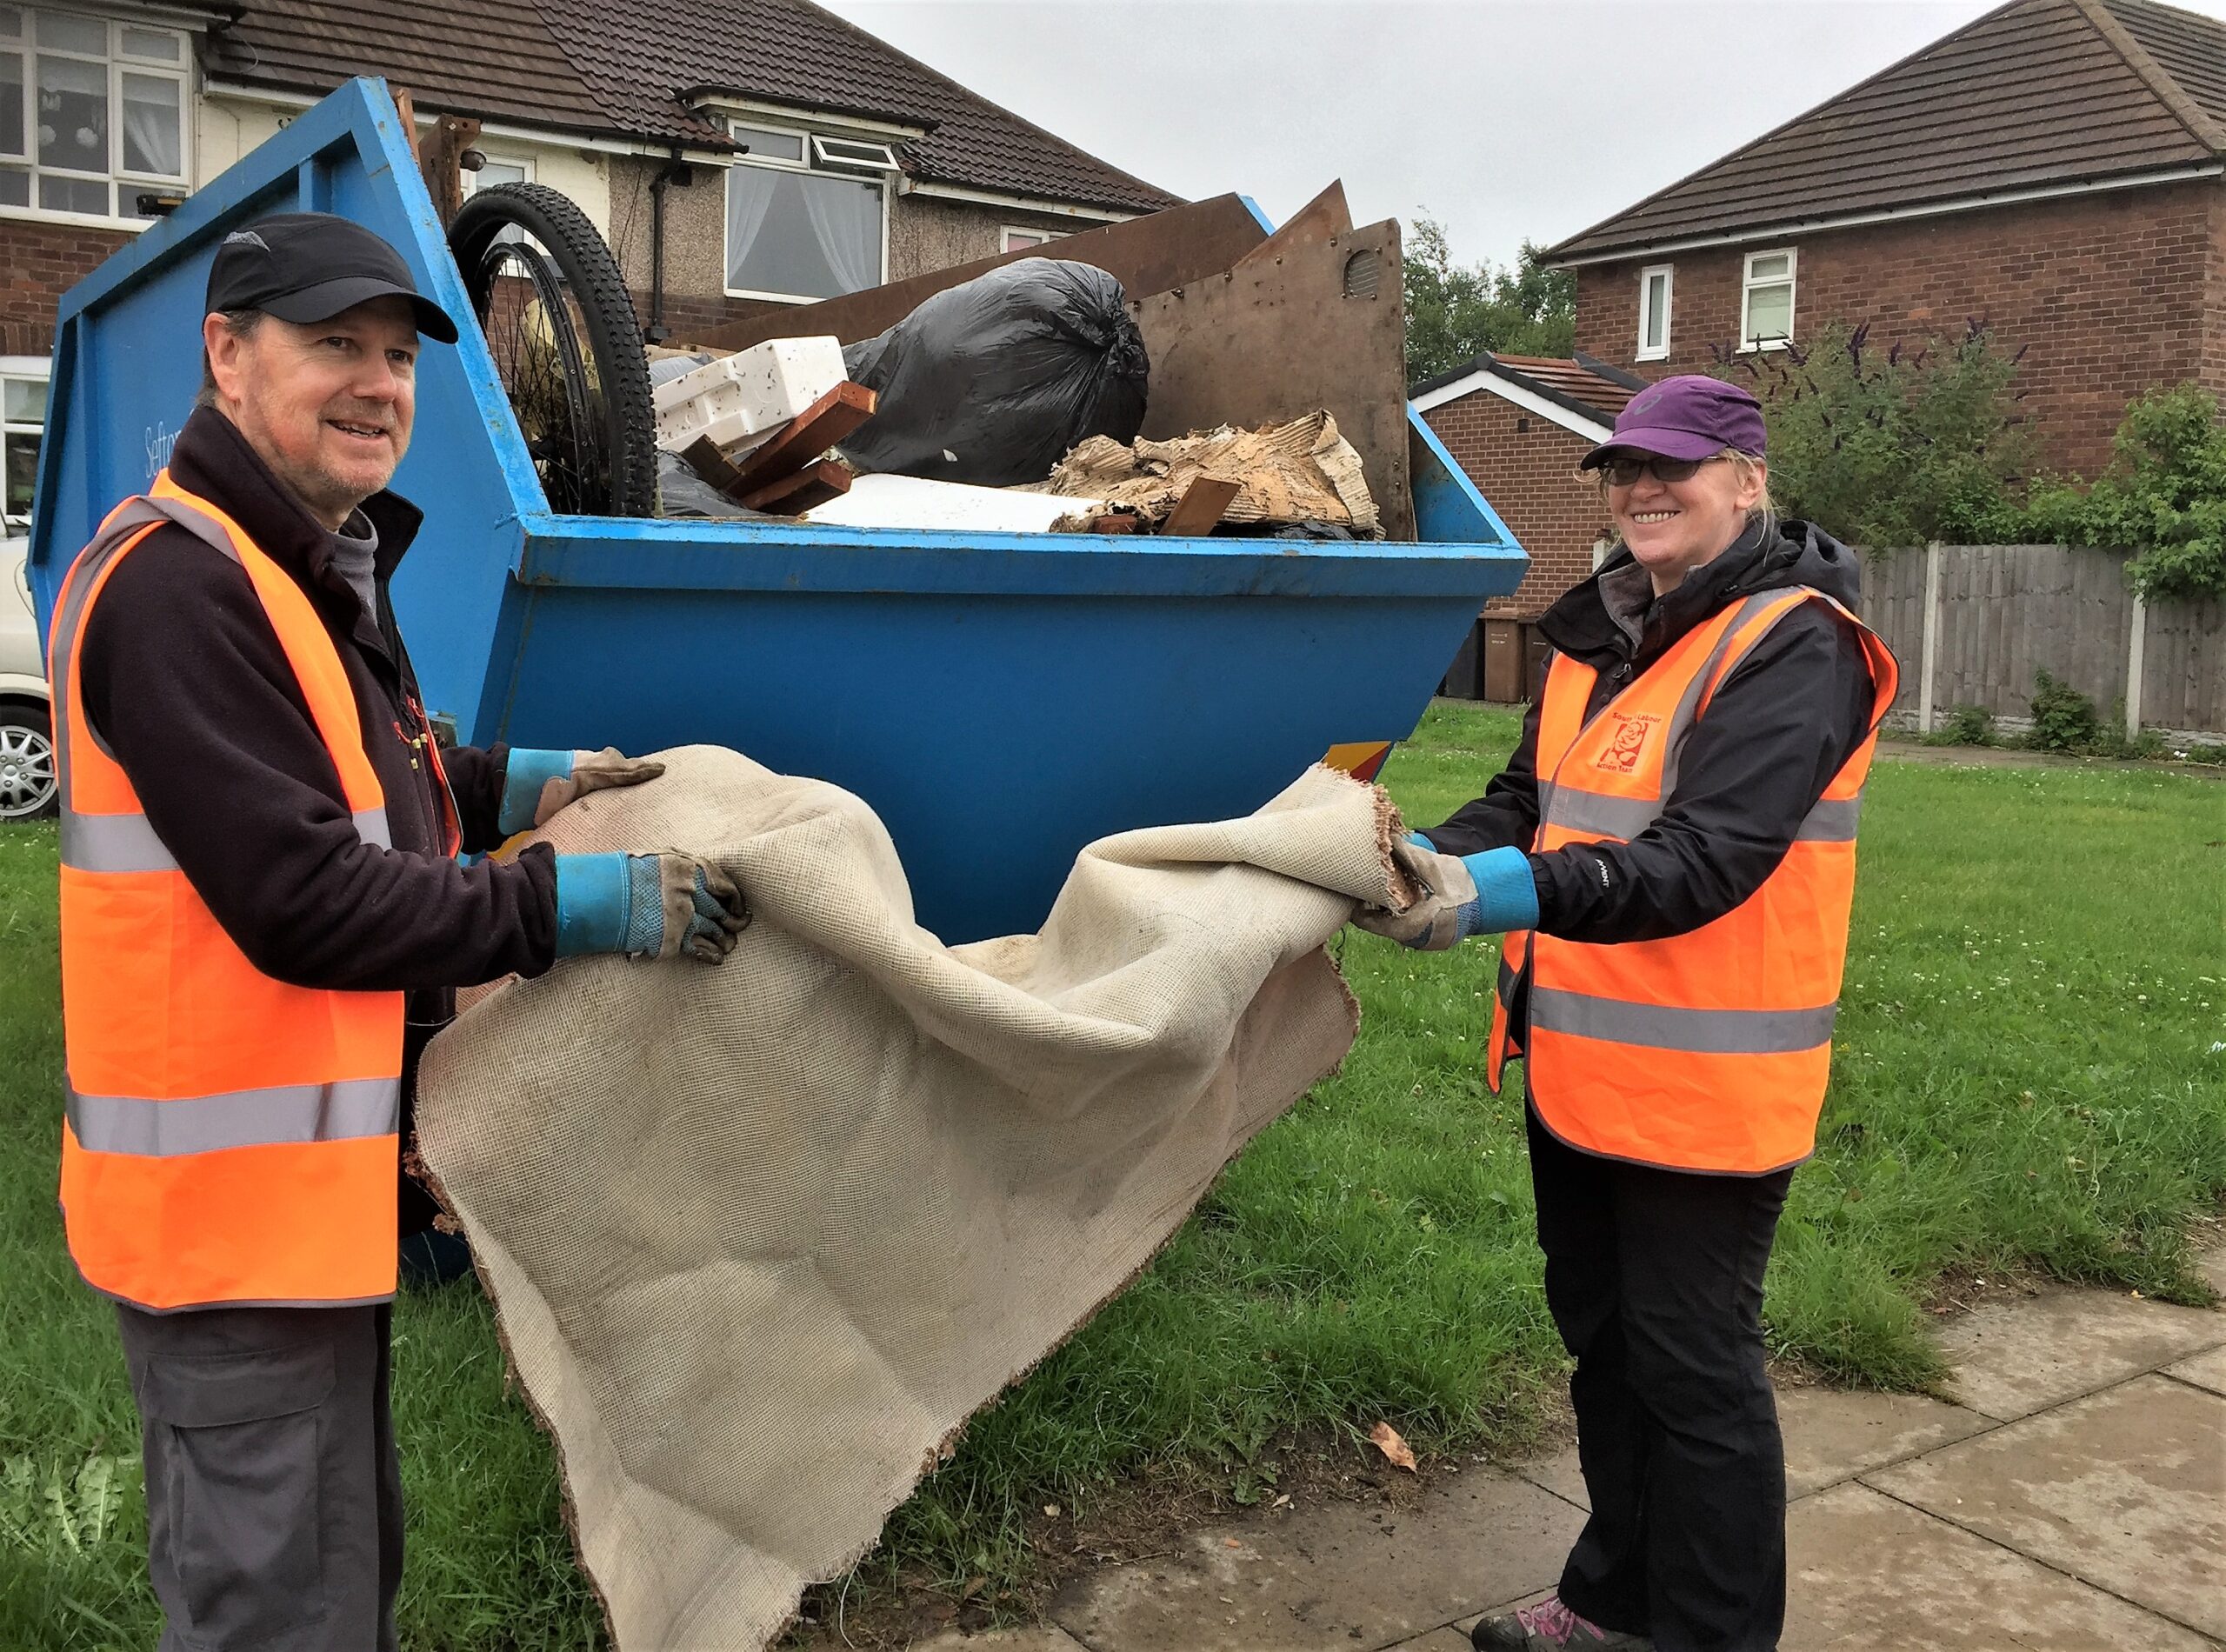 Norwood Ward councillors organised community skips to help householders in the ward get rid of a wide range of domestic junk